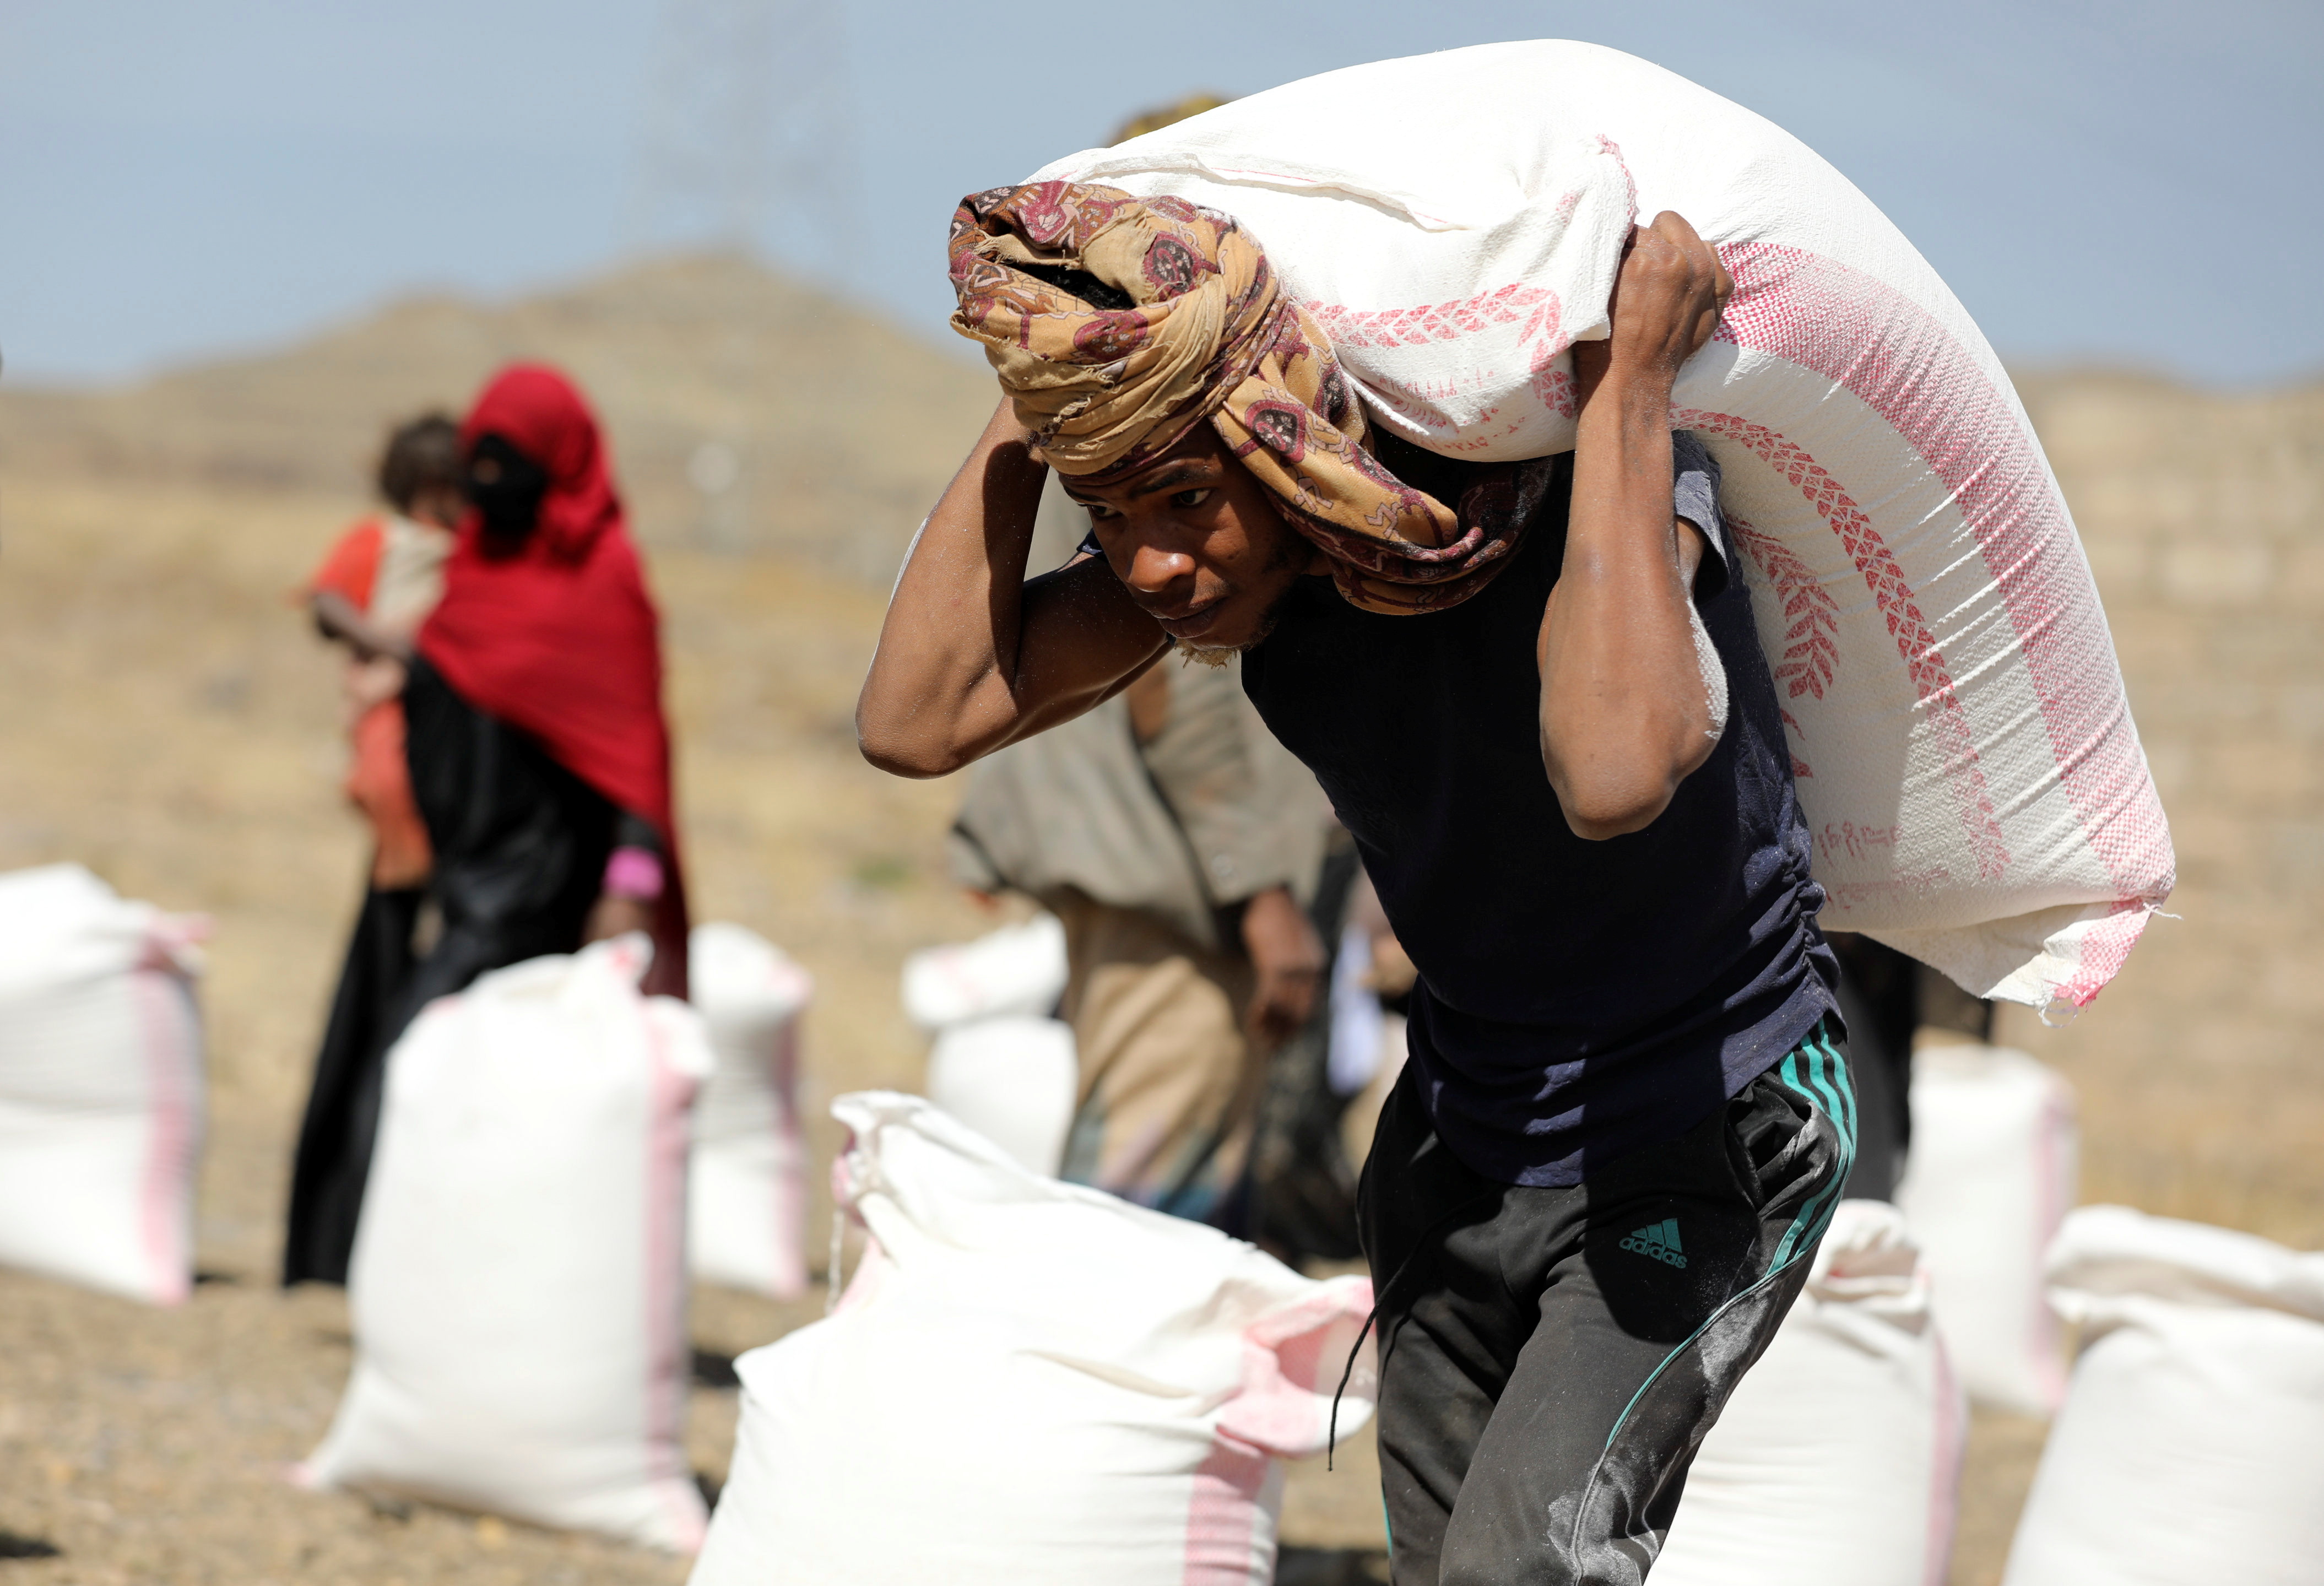 Worker carries a sack of wheat flour provided by the local charity Mona Relief to beneficiaries at a camp for internally displaced people on the outskirts of Sanaa